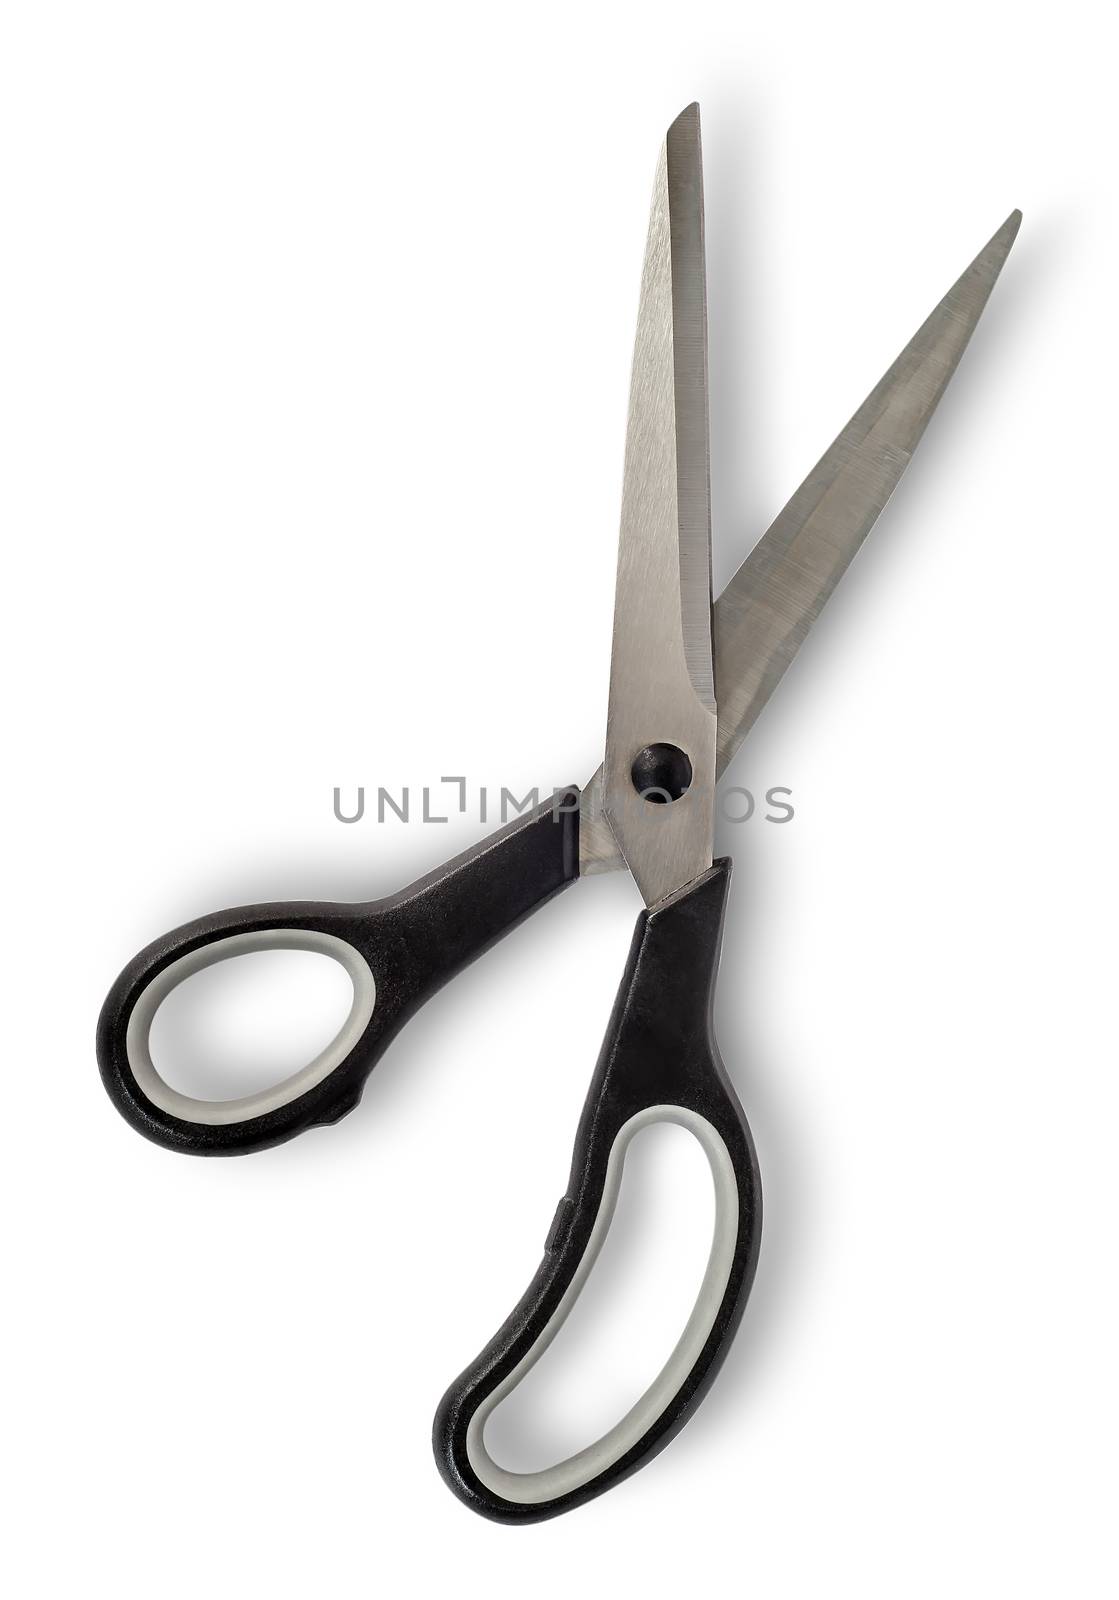 Disclosed big scissors with black handles by Cipariss